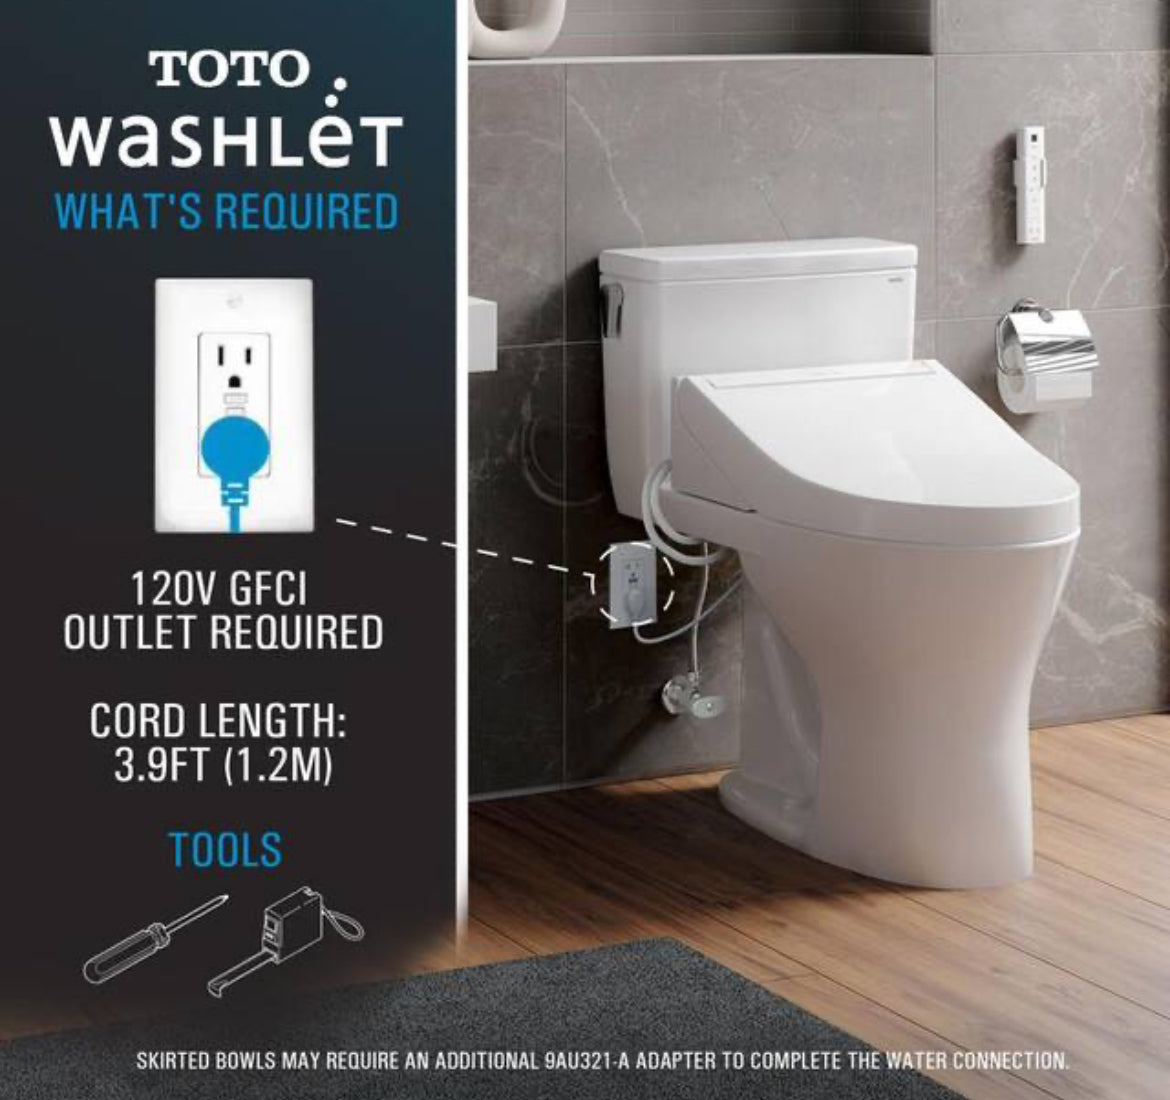 S500e WASHLET Electric Bidet Seat for Elongated Toilet with Contemporary Lid and in Cotton White